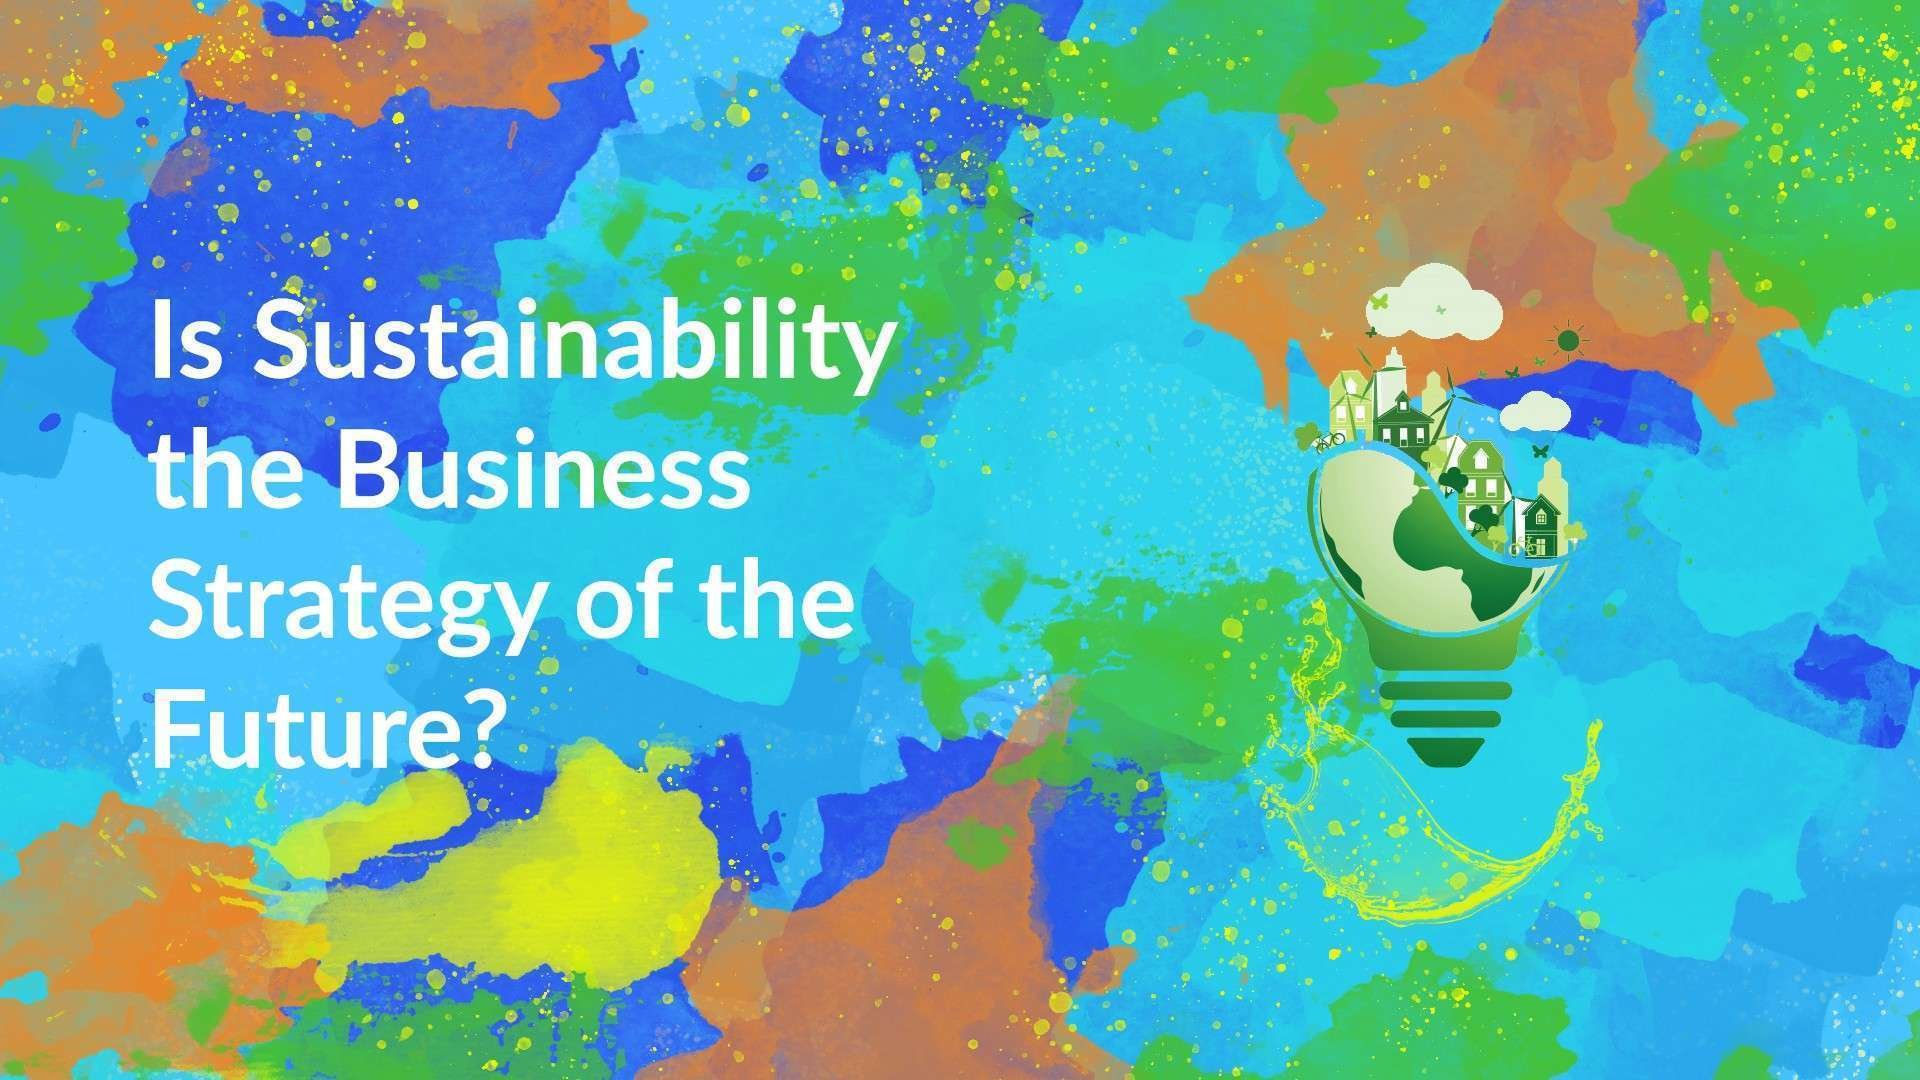 Is sustainability the Business Strategy of the Future? Artwork